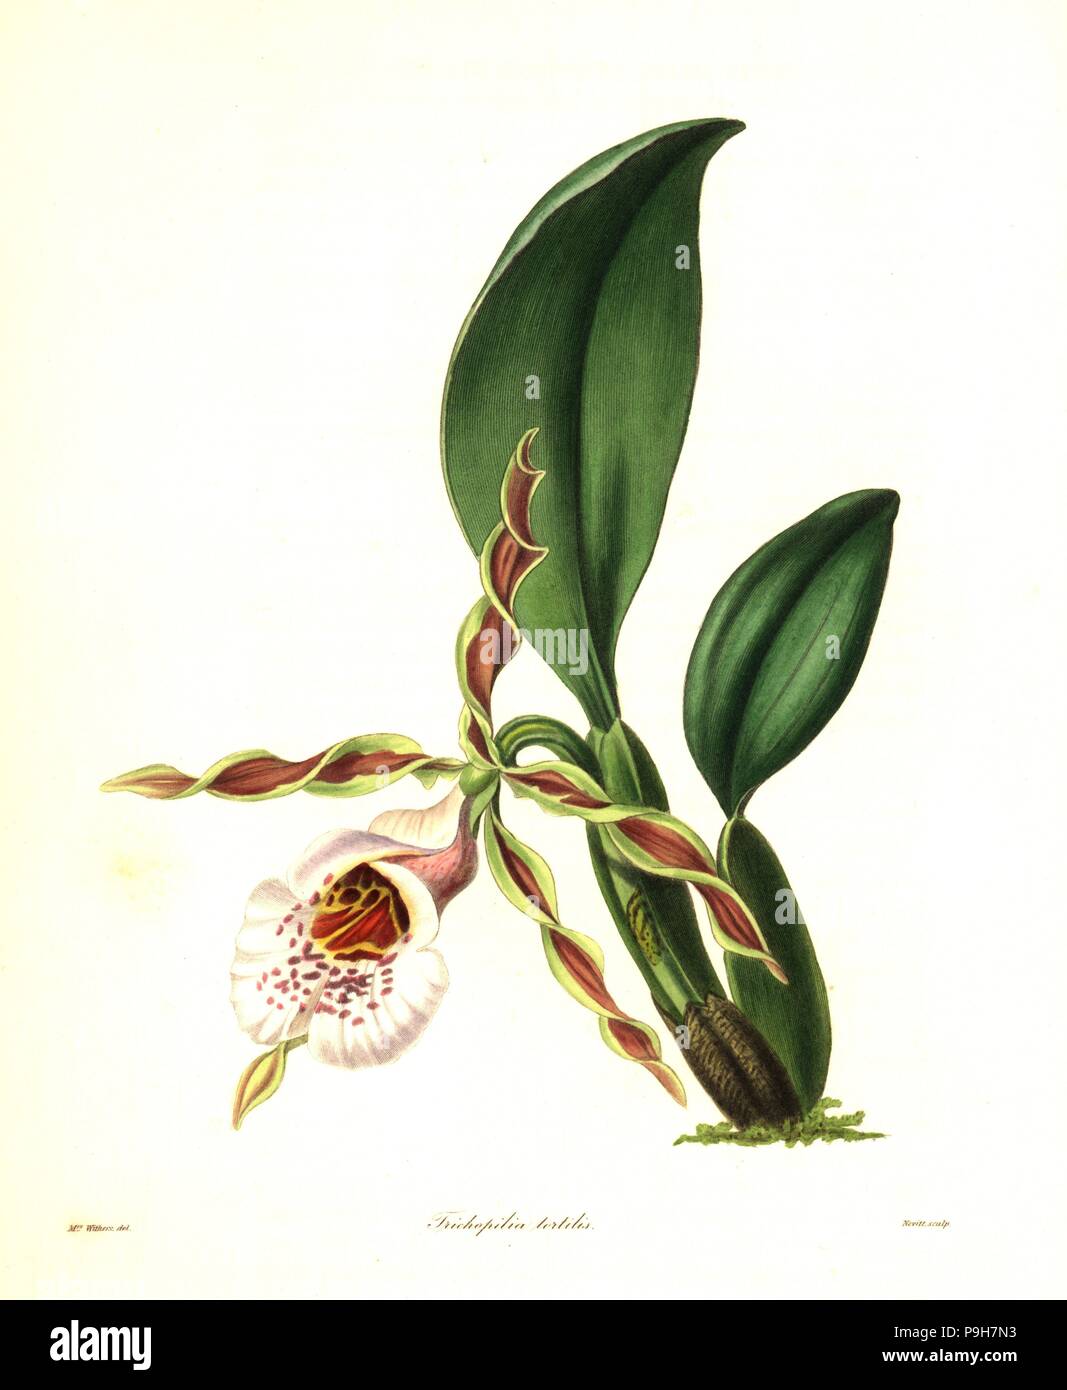 Twisted trichopilia orchid, Trichopilia tortilis. Handcoloured copperplate engraving by S. Nevitt after a botanical illustration by Mrs Augusta Withers from Benjamin Maund and the Rev. John Stevens Henslow's The Botanist, London, 1836. Stock Photo